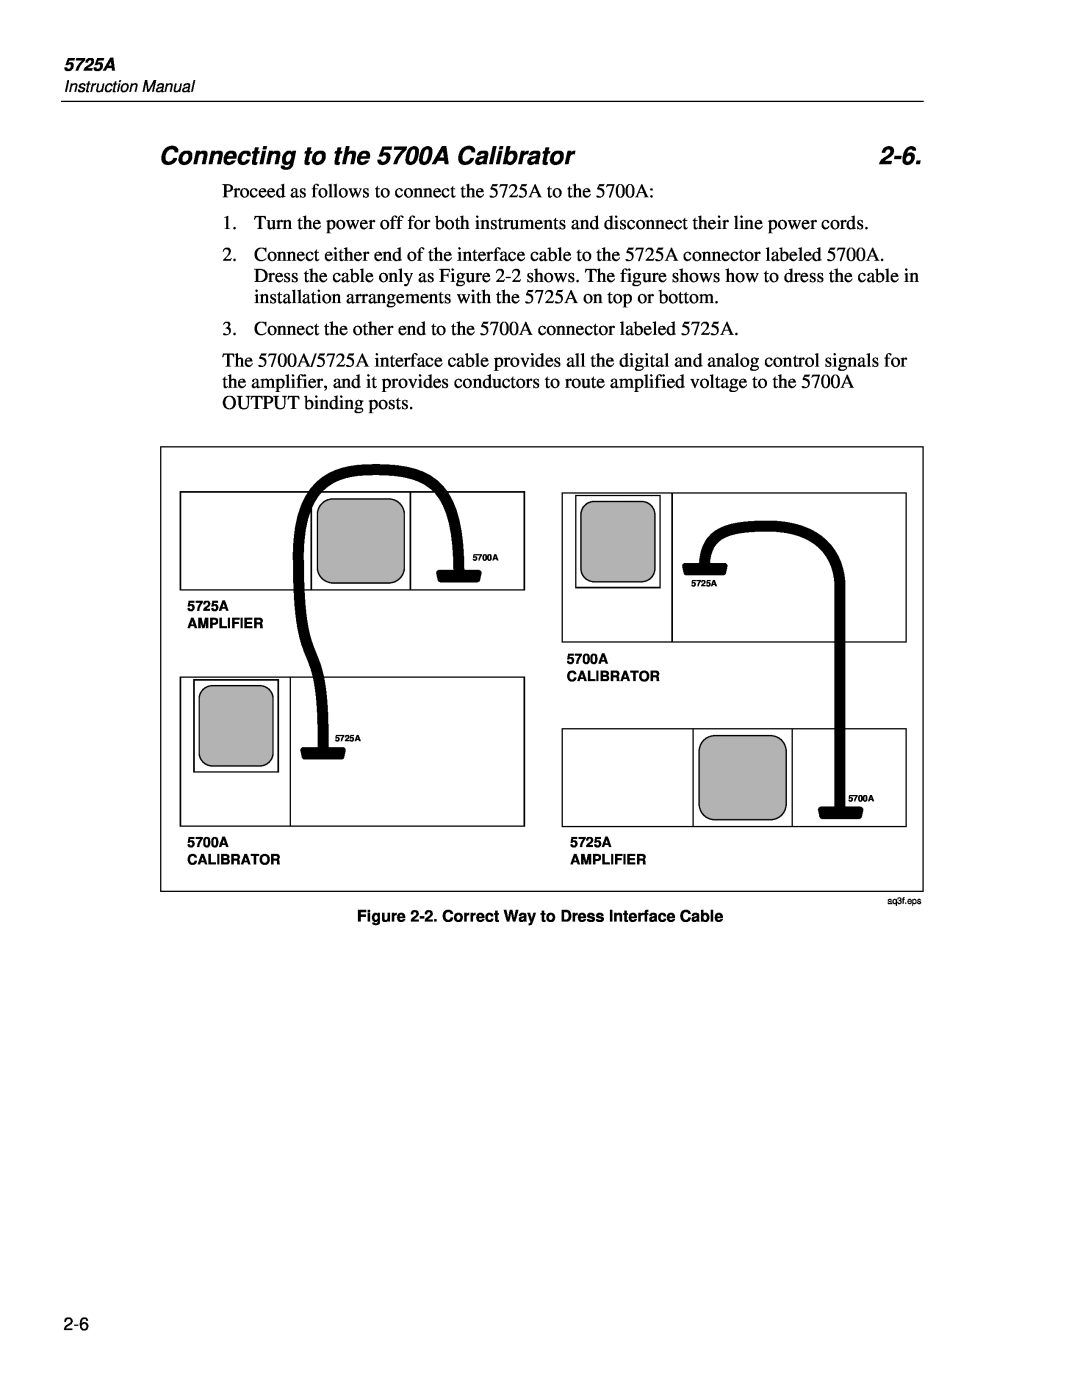 Fluke 5725A instruction manual Connecting to the 5700A Calibrator, 2.Correct Way to Dress Interface Cable 